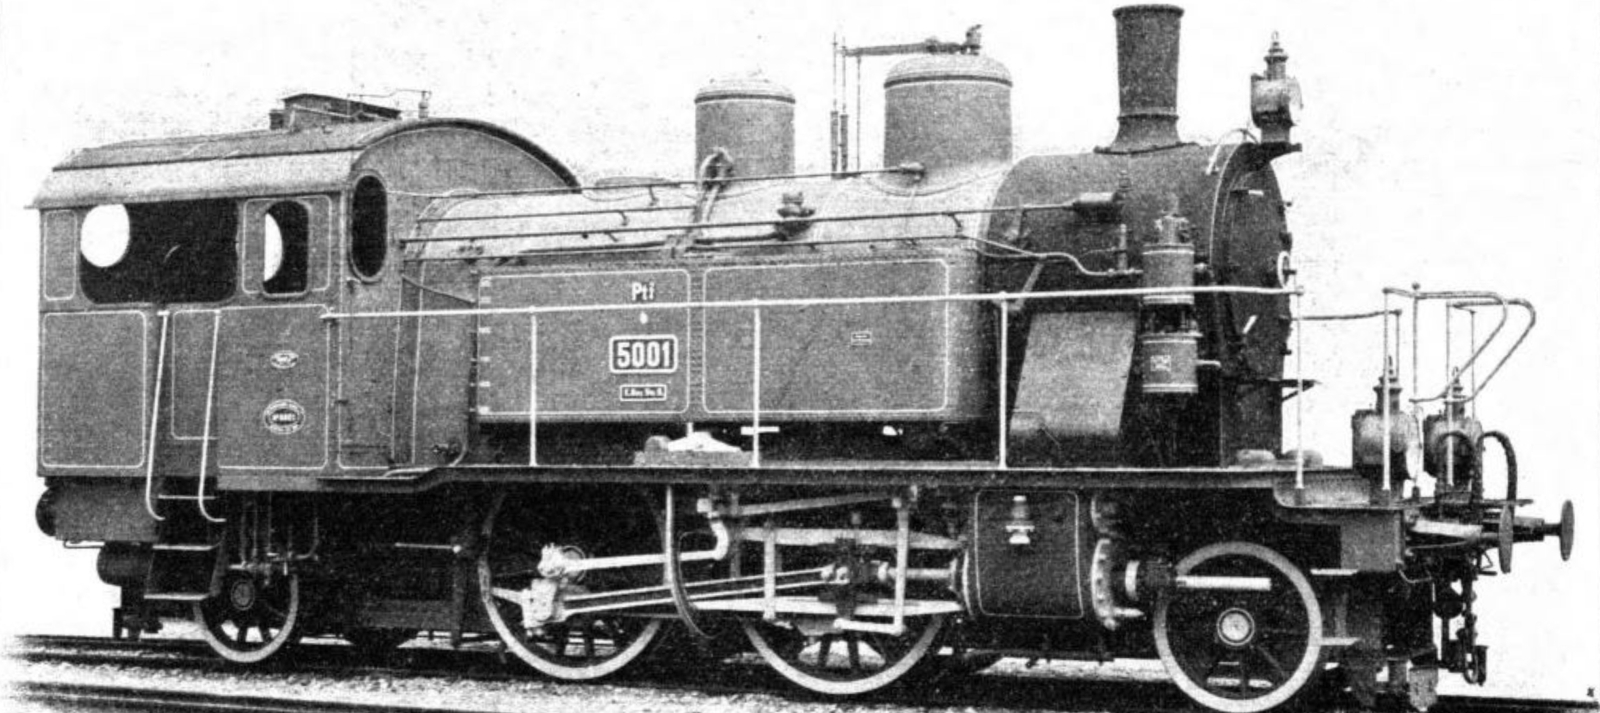 First variant (No. 5001 to 5010)